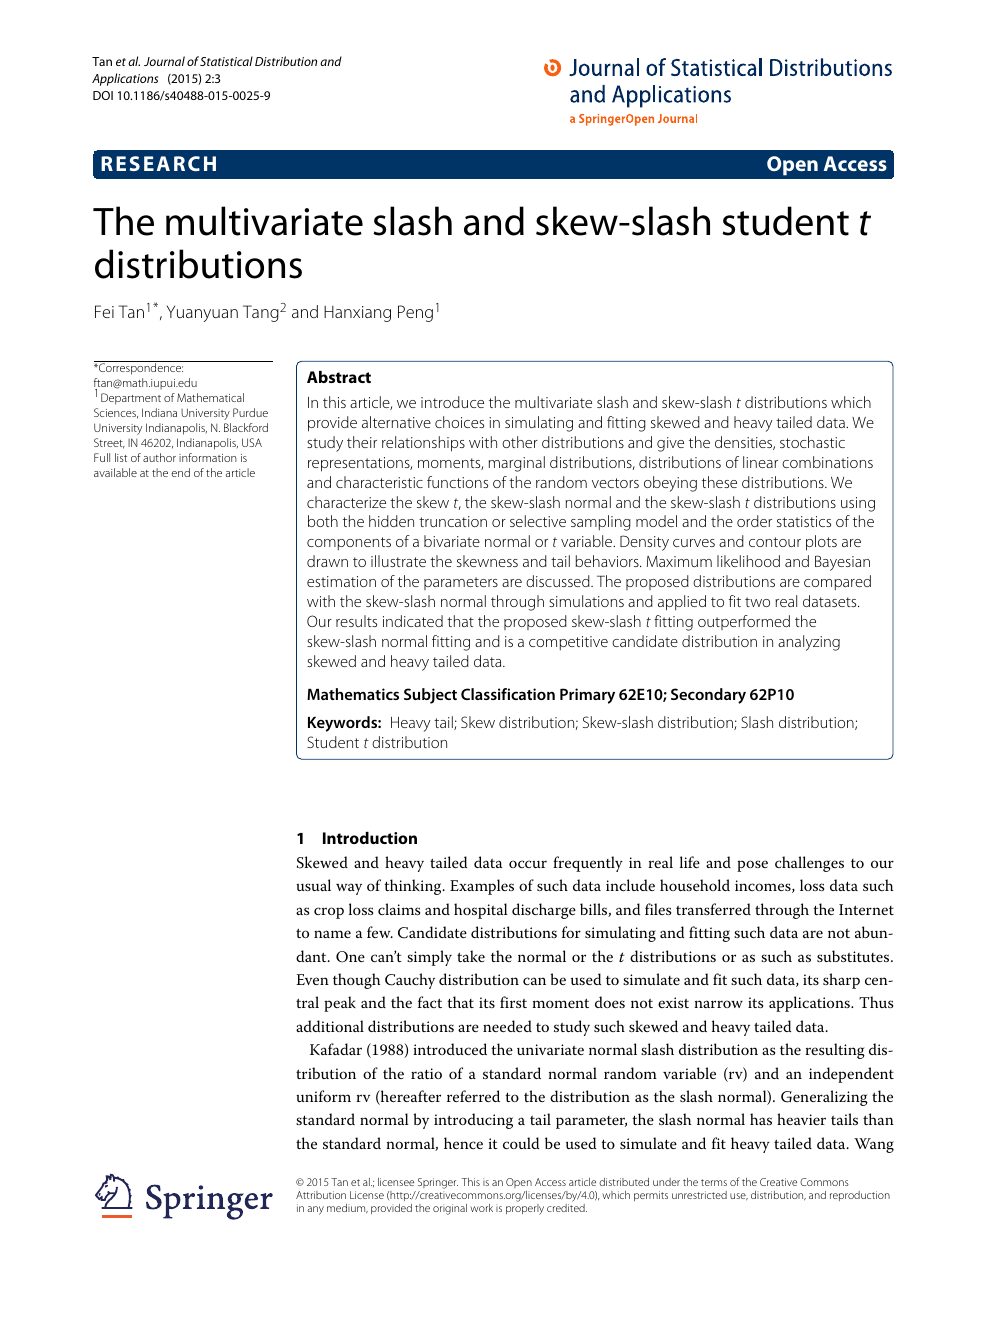 The Multivariate Slash And Skew Slash Student T Distributions Topic Of Research Paper In Mathematics Download Scholarly Article Pdf And Read For Free On Cyberleninka Open Science Hub